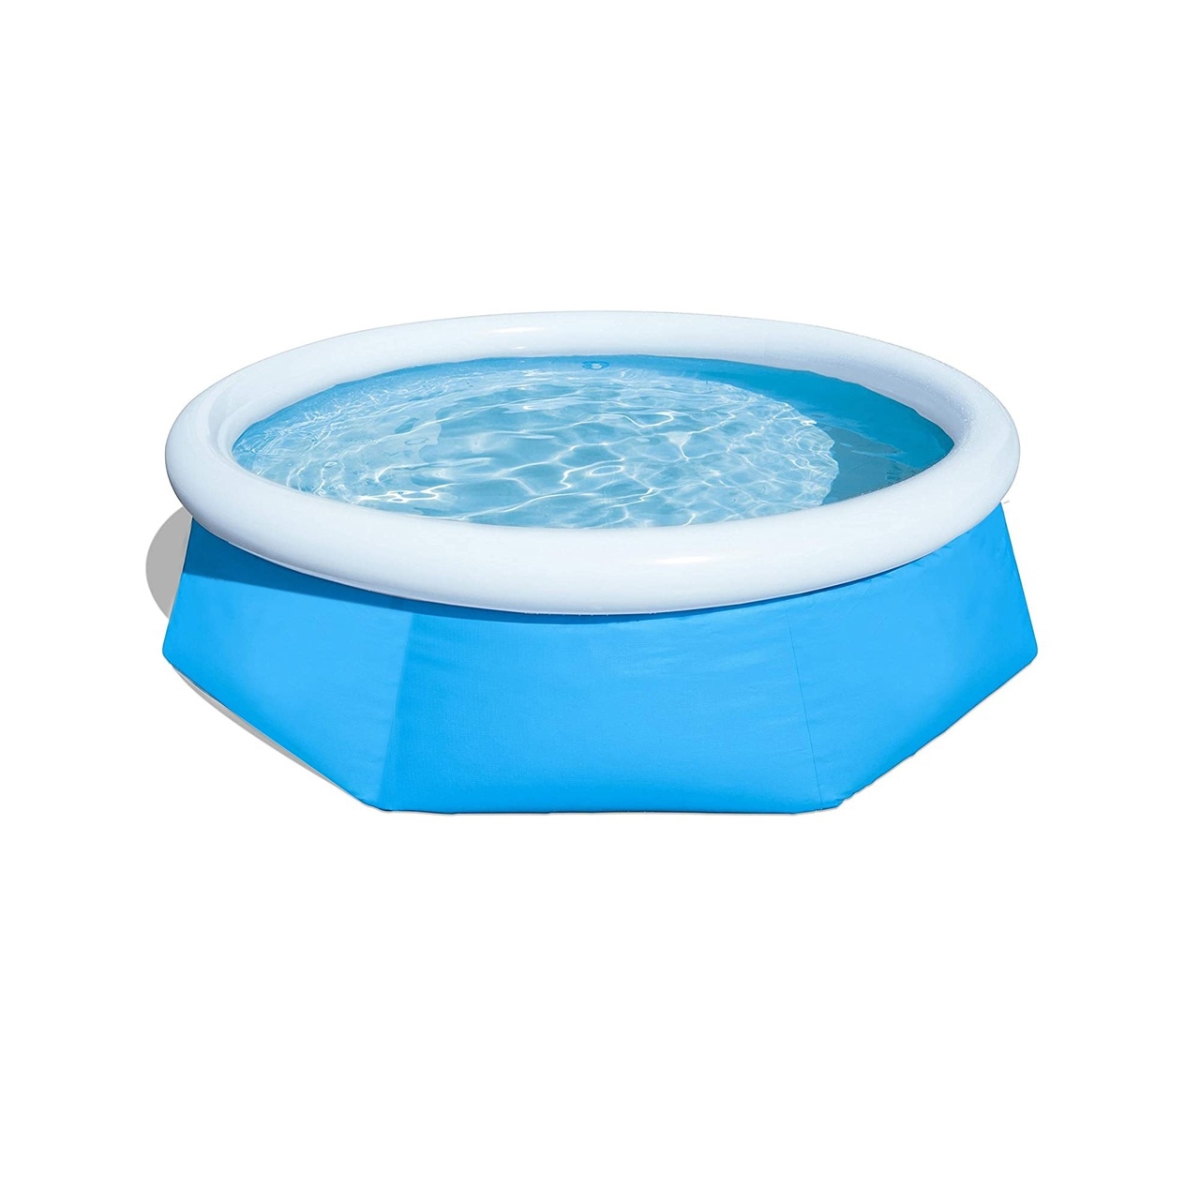 Pool Central 34808723 12 ft. Round Inflatable Easy Set Kids Swimming Pool with Filter Pump